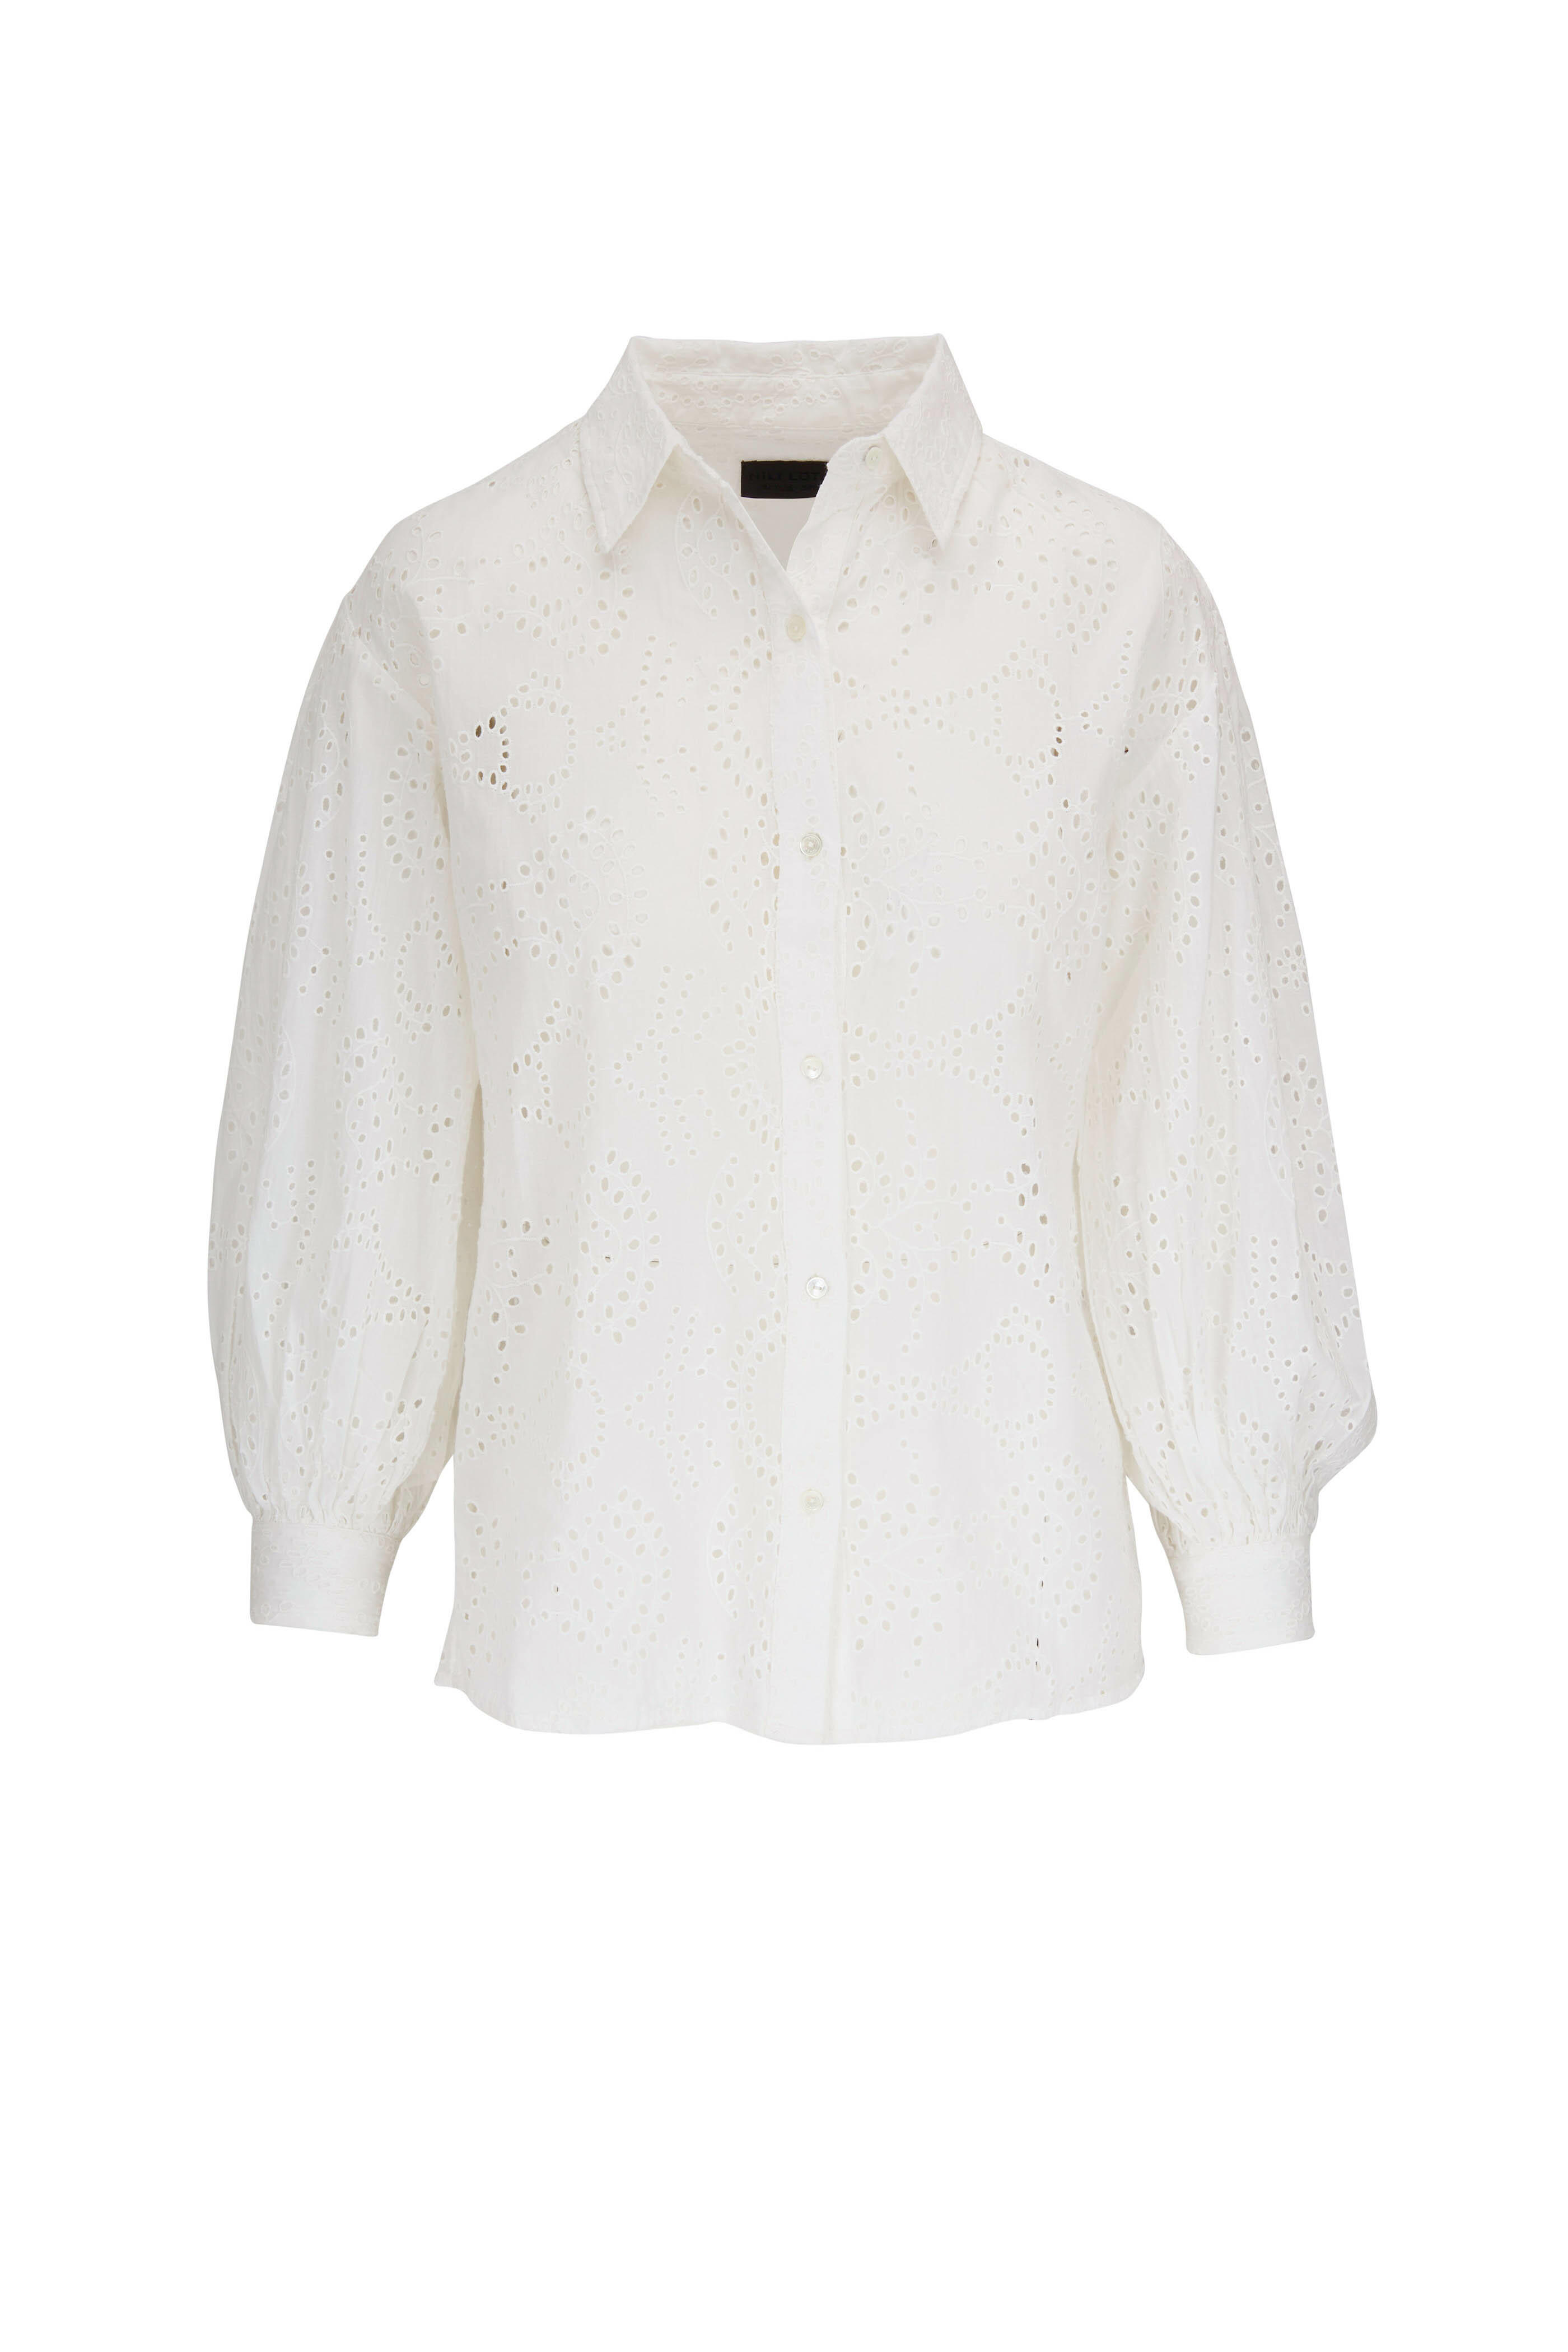 Ivory Eyelet Top - Embroidered Cotton Top - Button-Up Top - Lulus